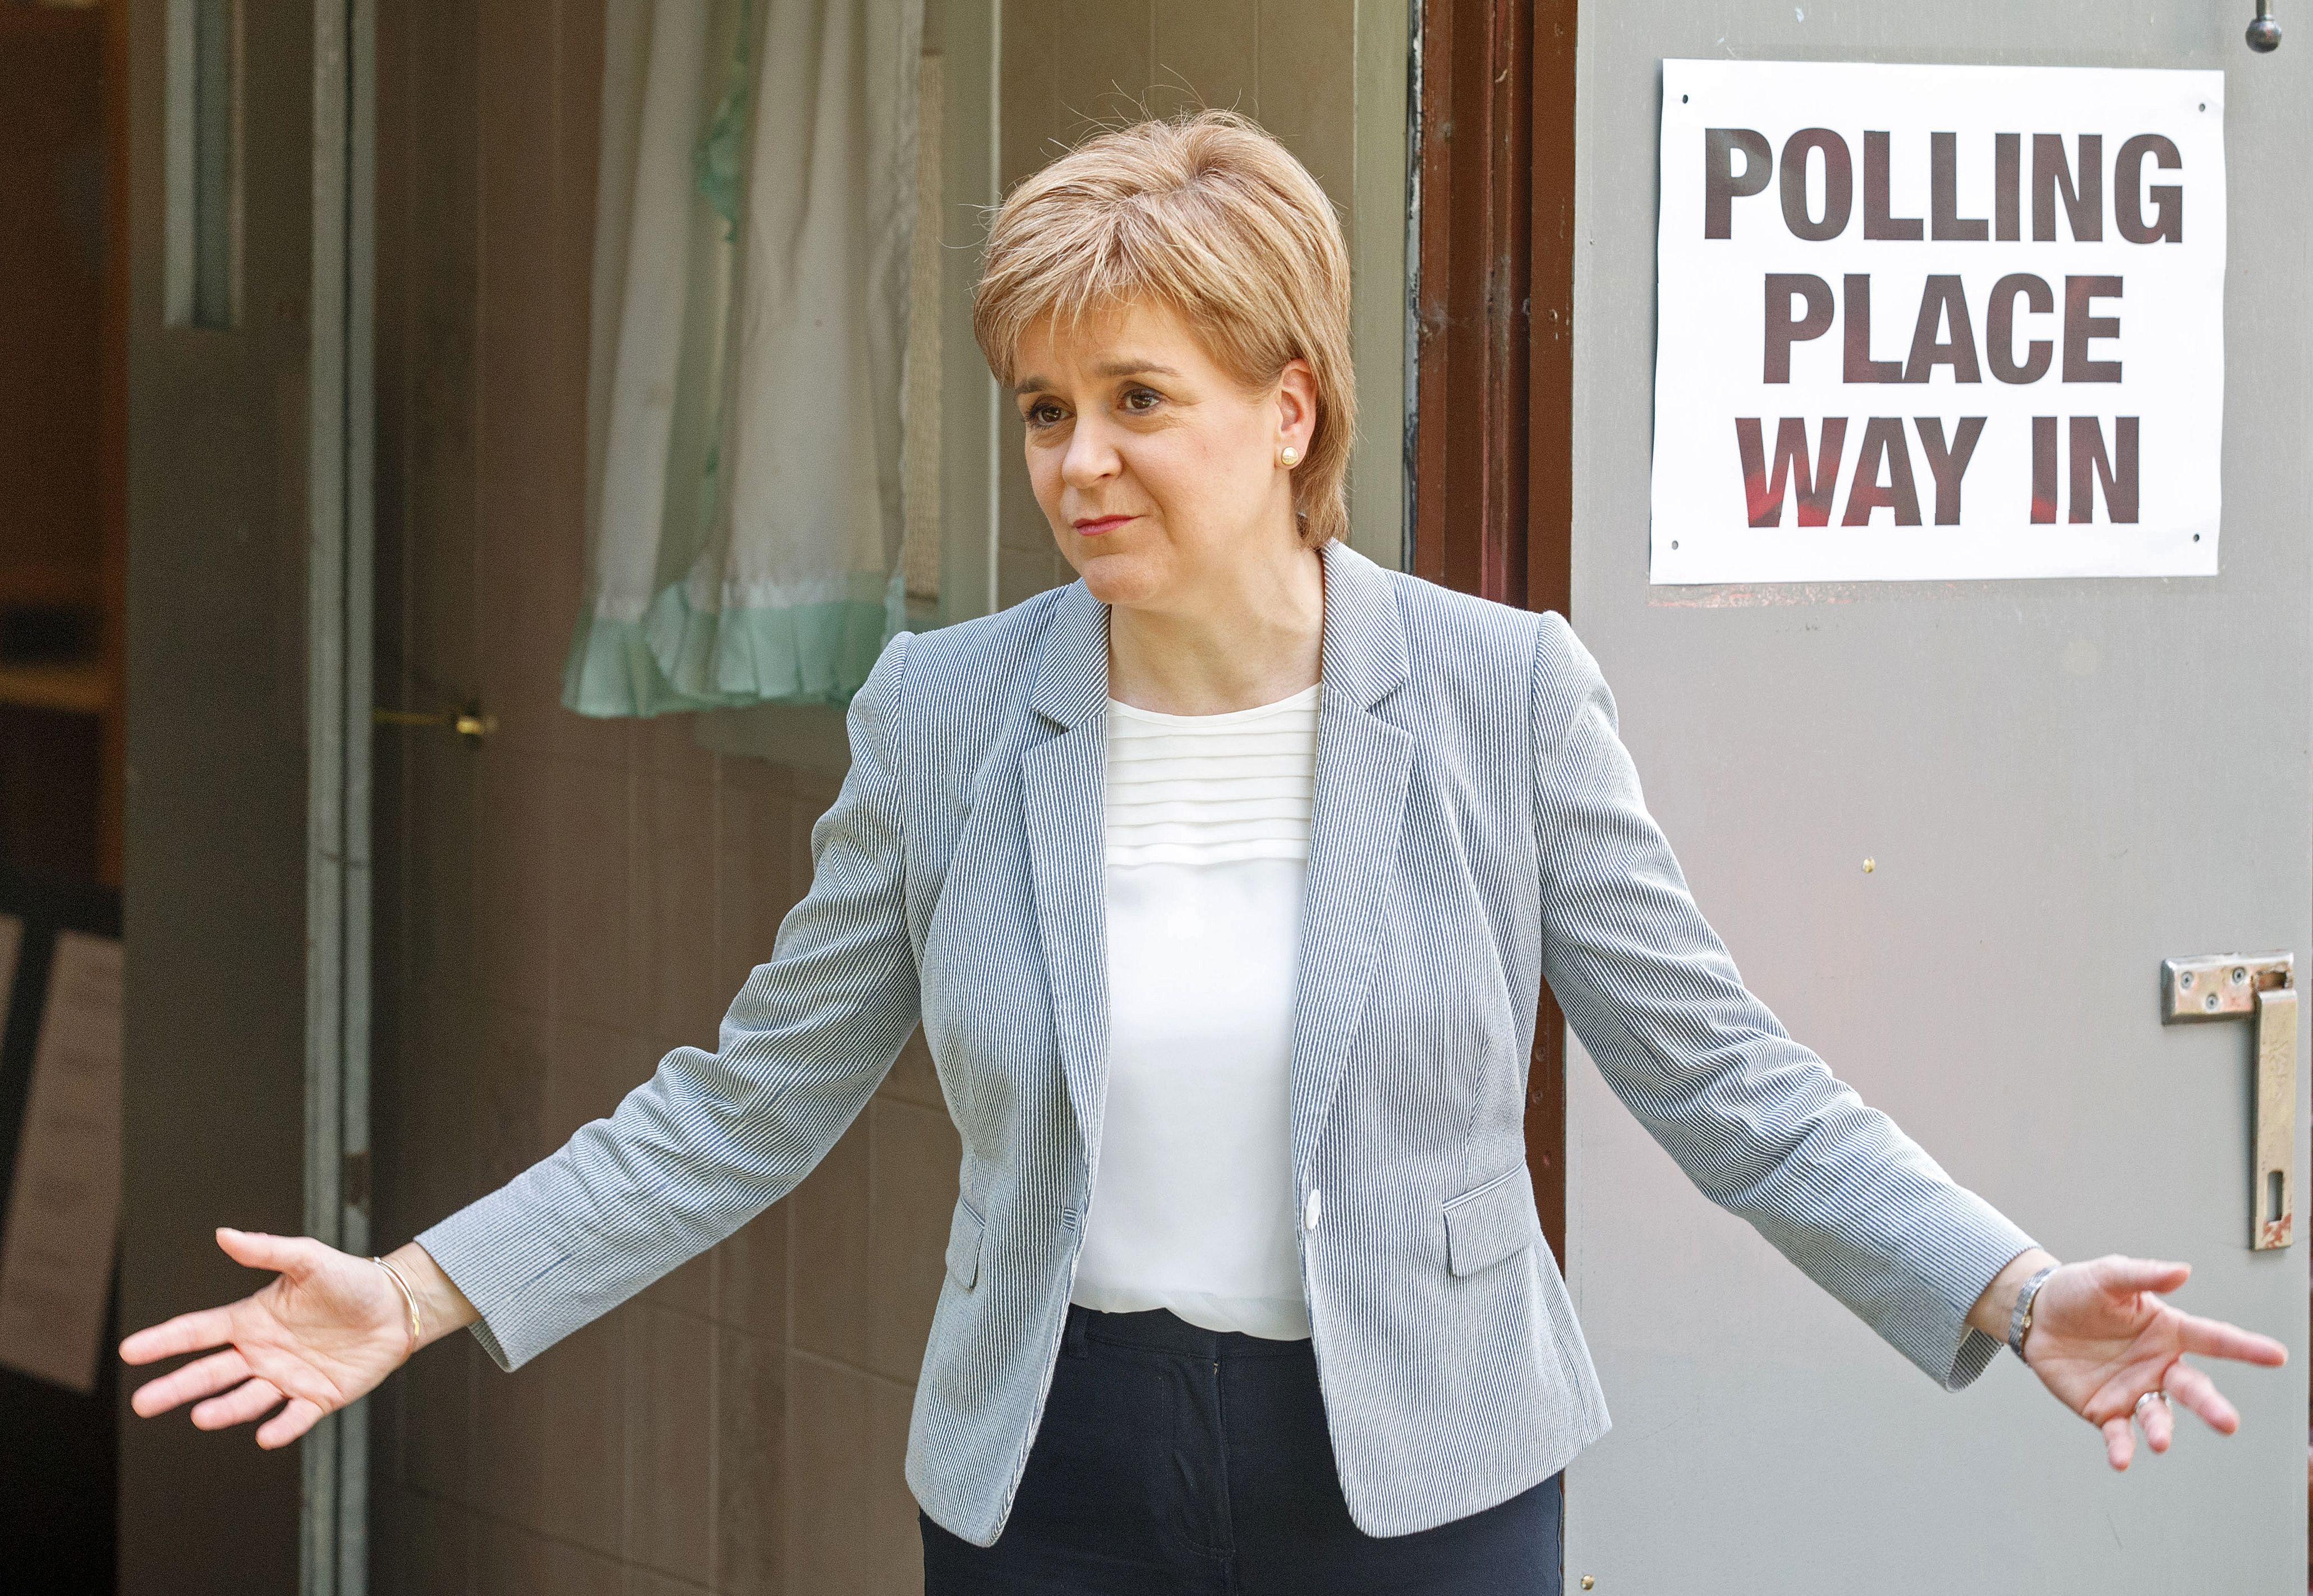 Scotland's First Minister and Leader of the Scottish National Party (SNP), Nicola Sturgeon, reacts as leaves after voting at a polling station at Broomhouse Community Hall in east Glasgow, on June 23, 2016. (Robert Perry—AFP/Getty Images)